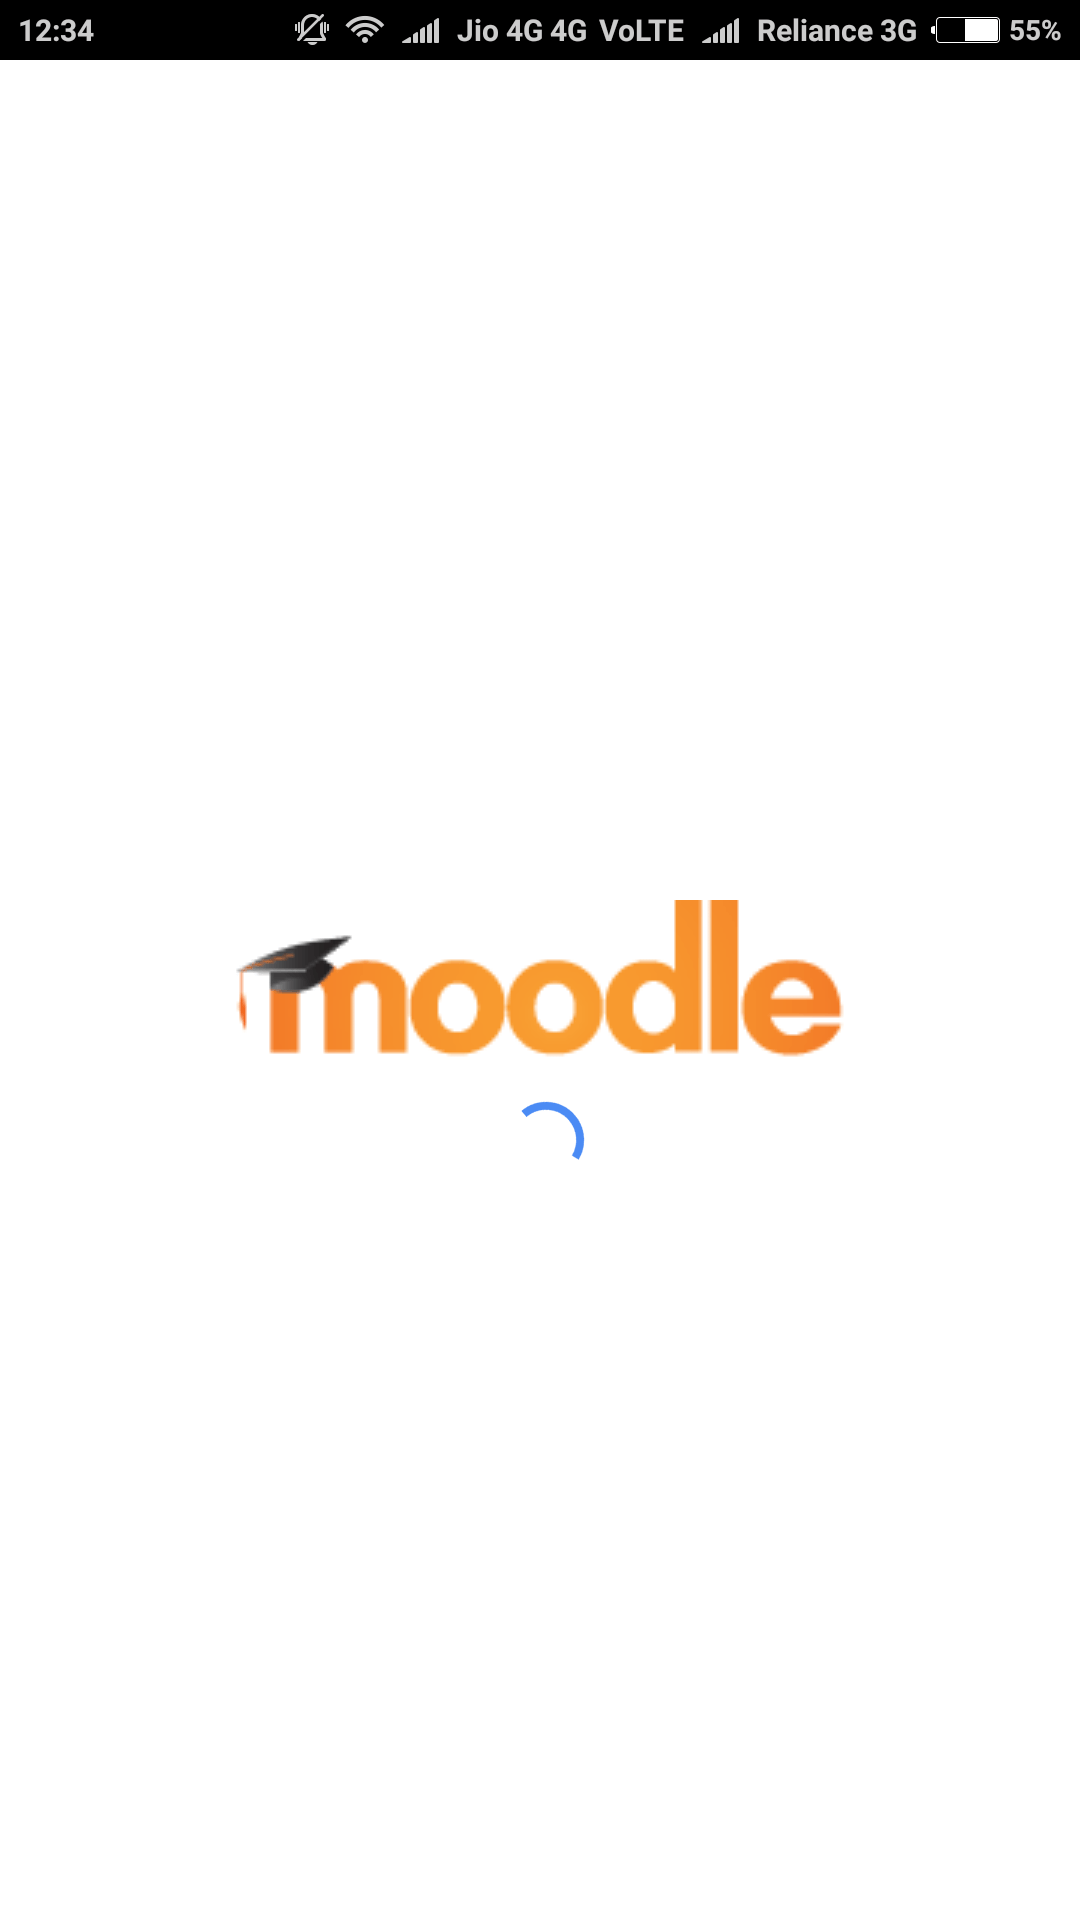 General Mobile App Logo - Moodle in English: How to replace moodle logo with site logo